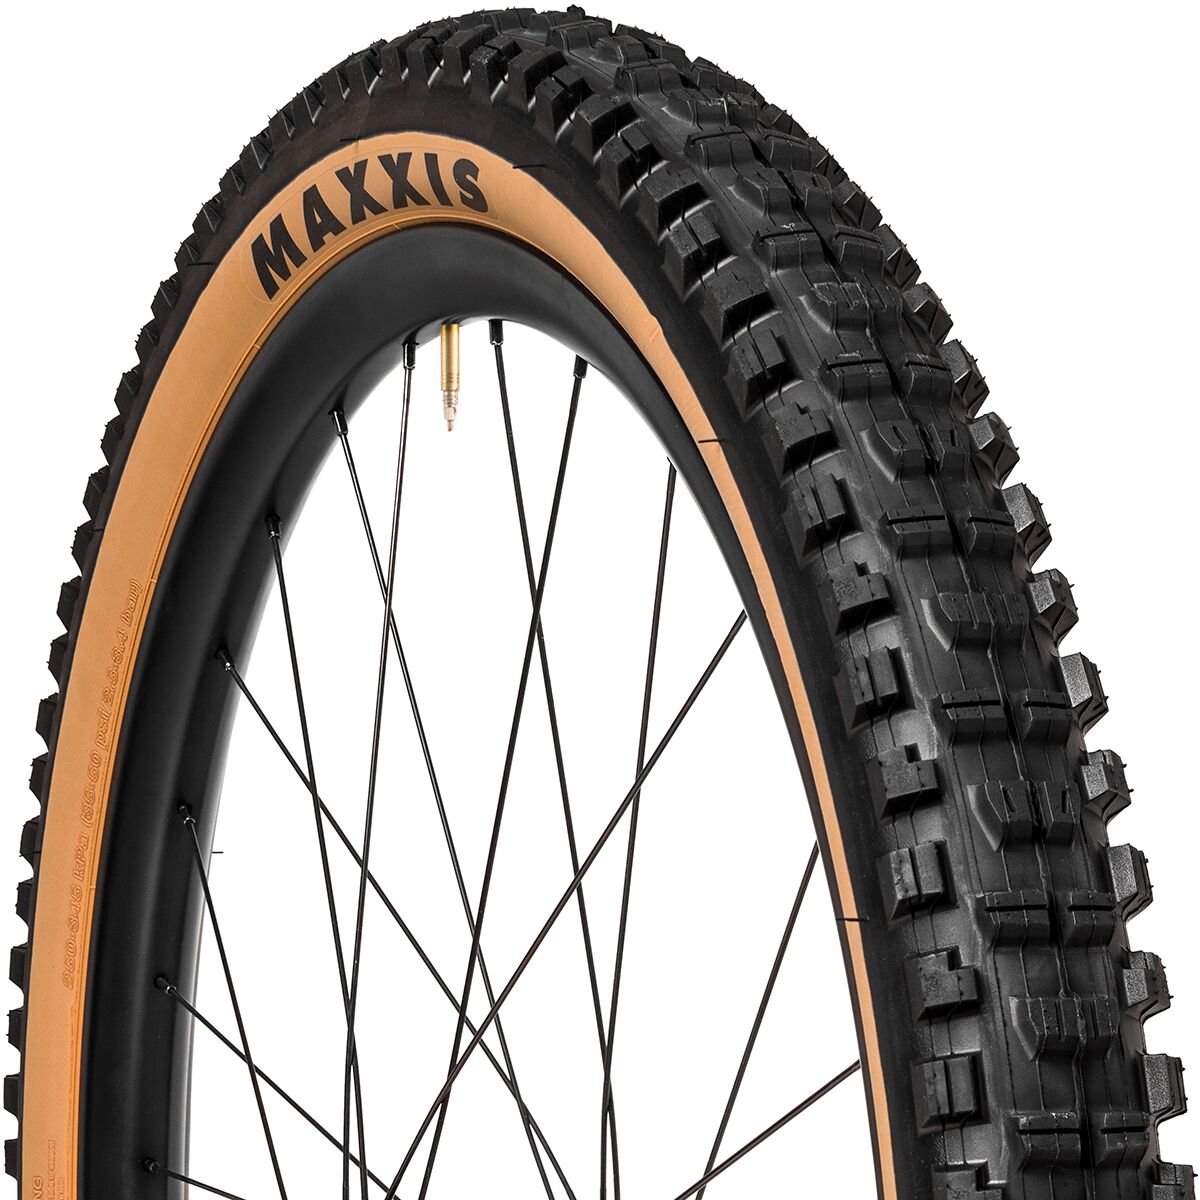 Maxxis Minion DHR II Wide Trail Dual Compound/EXO/TR 27.5in Tire